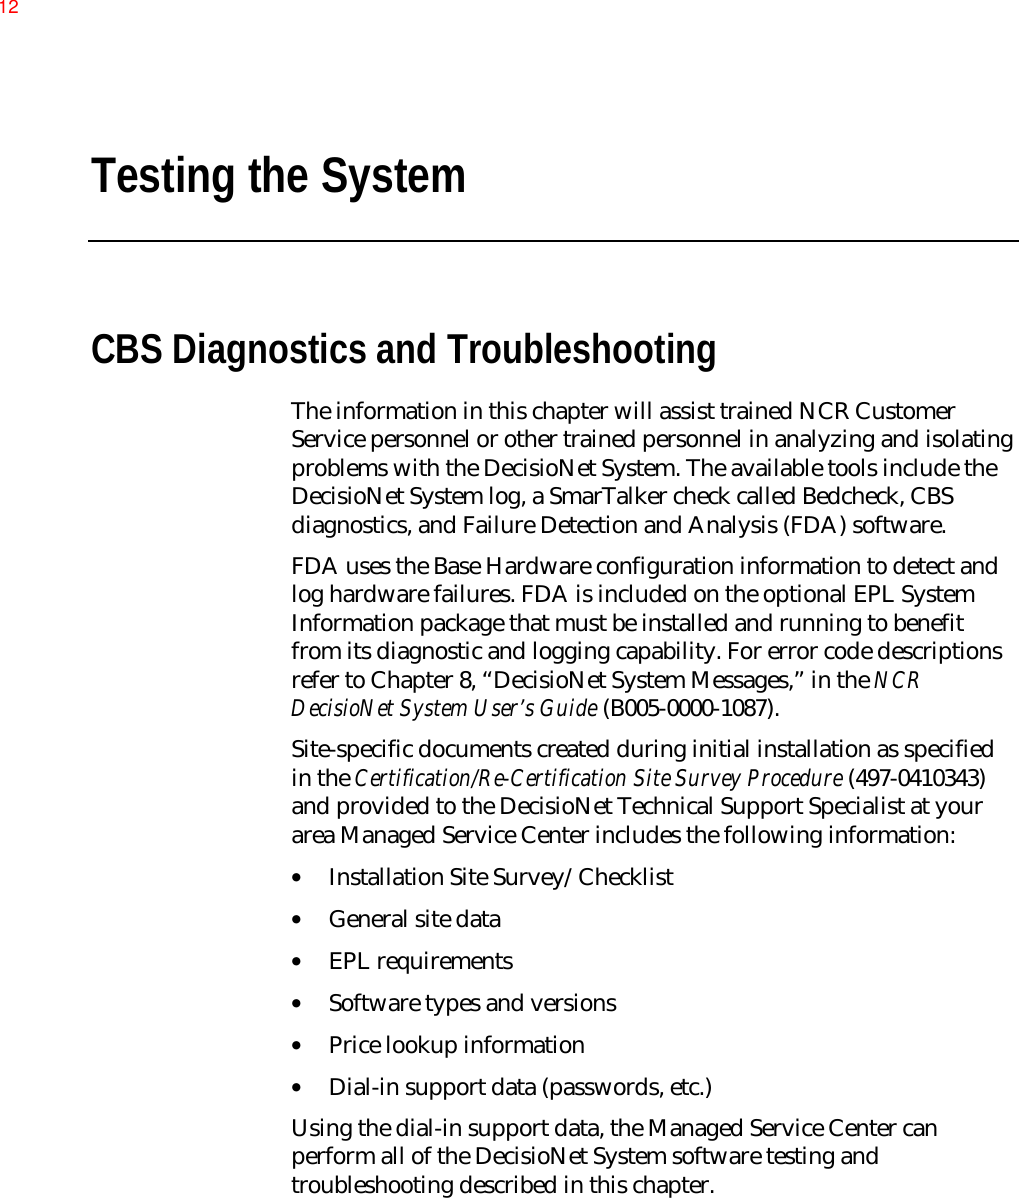 Testing the SystemCBS Diagnostics and TroubleshootingThe information in this chapter will assist trained NCR CustomerService personnel or other trained personnel in analyzing and isolatingproblems with the DecisioNet System. The available tools include theDecisioNet System log, a SmarTalker check called Bedcheck, CBSdiagnostics, and Failure Detection and Analysis (FDA) software.FDA uses the Base Hardware configuration information to detect andlog hardware failures. FDA is included on the optional EPL SystemInformation package that must be installed and running to benefitfrom its diagnostic and logging capability. For error code descriptionsrefer to Chapter 8, “DecisioNet System Messages,” in the NCRDecisioNet System User’s Guide (B005-0000-1087).Site-specific documents created during initial installation as specifiedin the Certification/Re-Certification Site Survey Procedure (497-0410343)and provided to the DecisioNet Technical Support Specialist at yourarea Managed Service Center includes the following information:• Installation Site Survey/Checklist• General site data• EPL requirements• Software types and versions• Price lookup information• Dial-in support data (passwords, etc.)Using the dial-in support data, the Managed Service Center canperform all of the DecisioNet System software testing andtroubleshooting described in this chapter.12